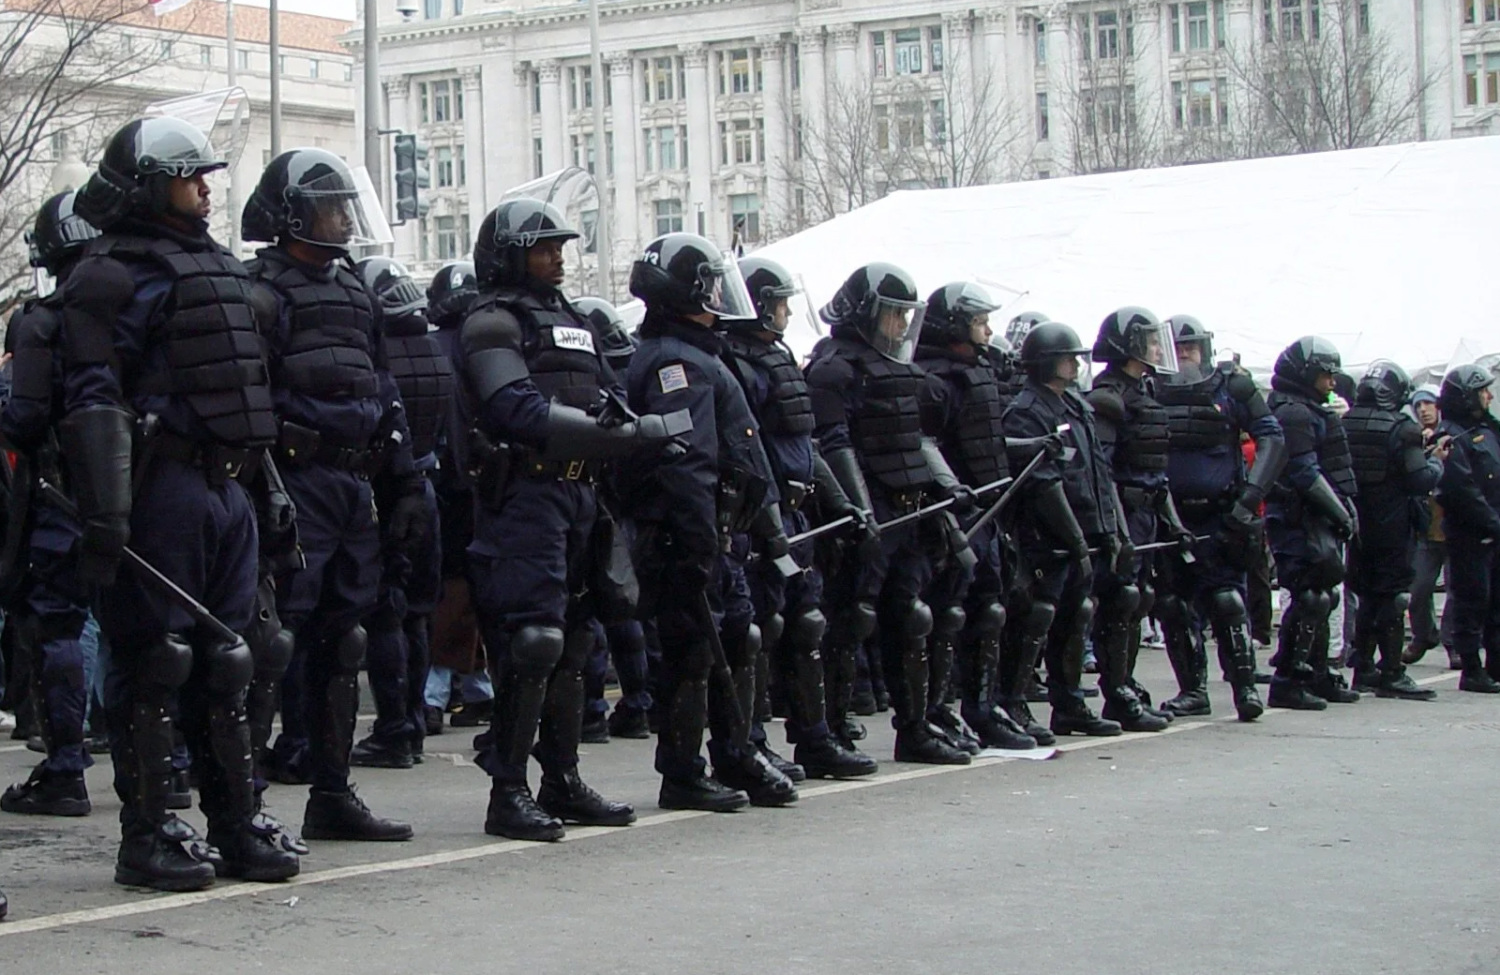 row of police officers